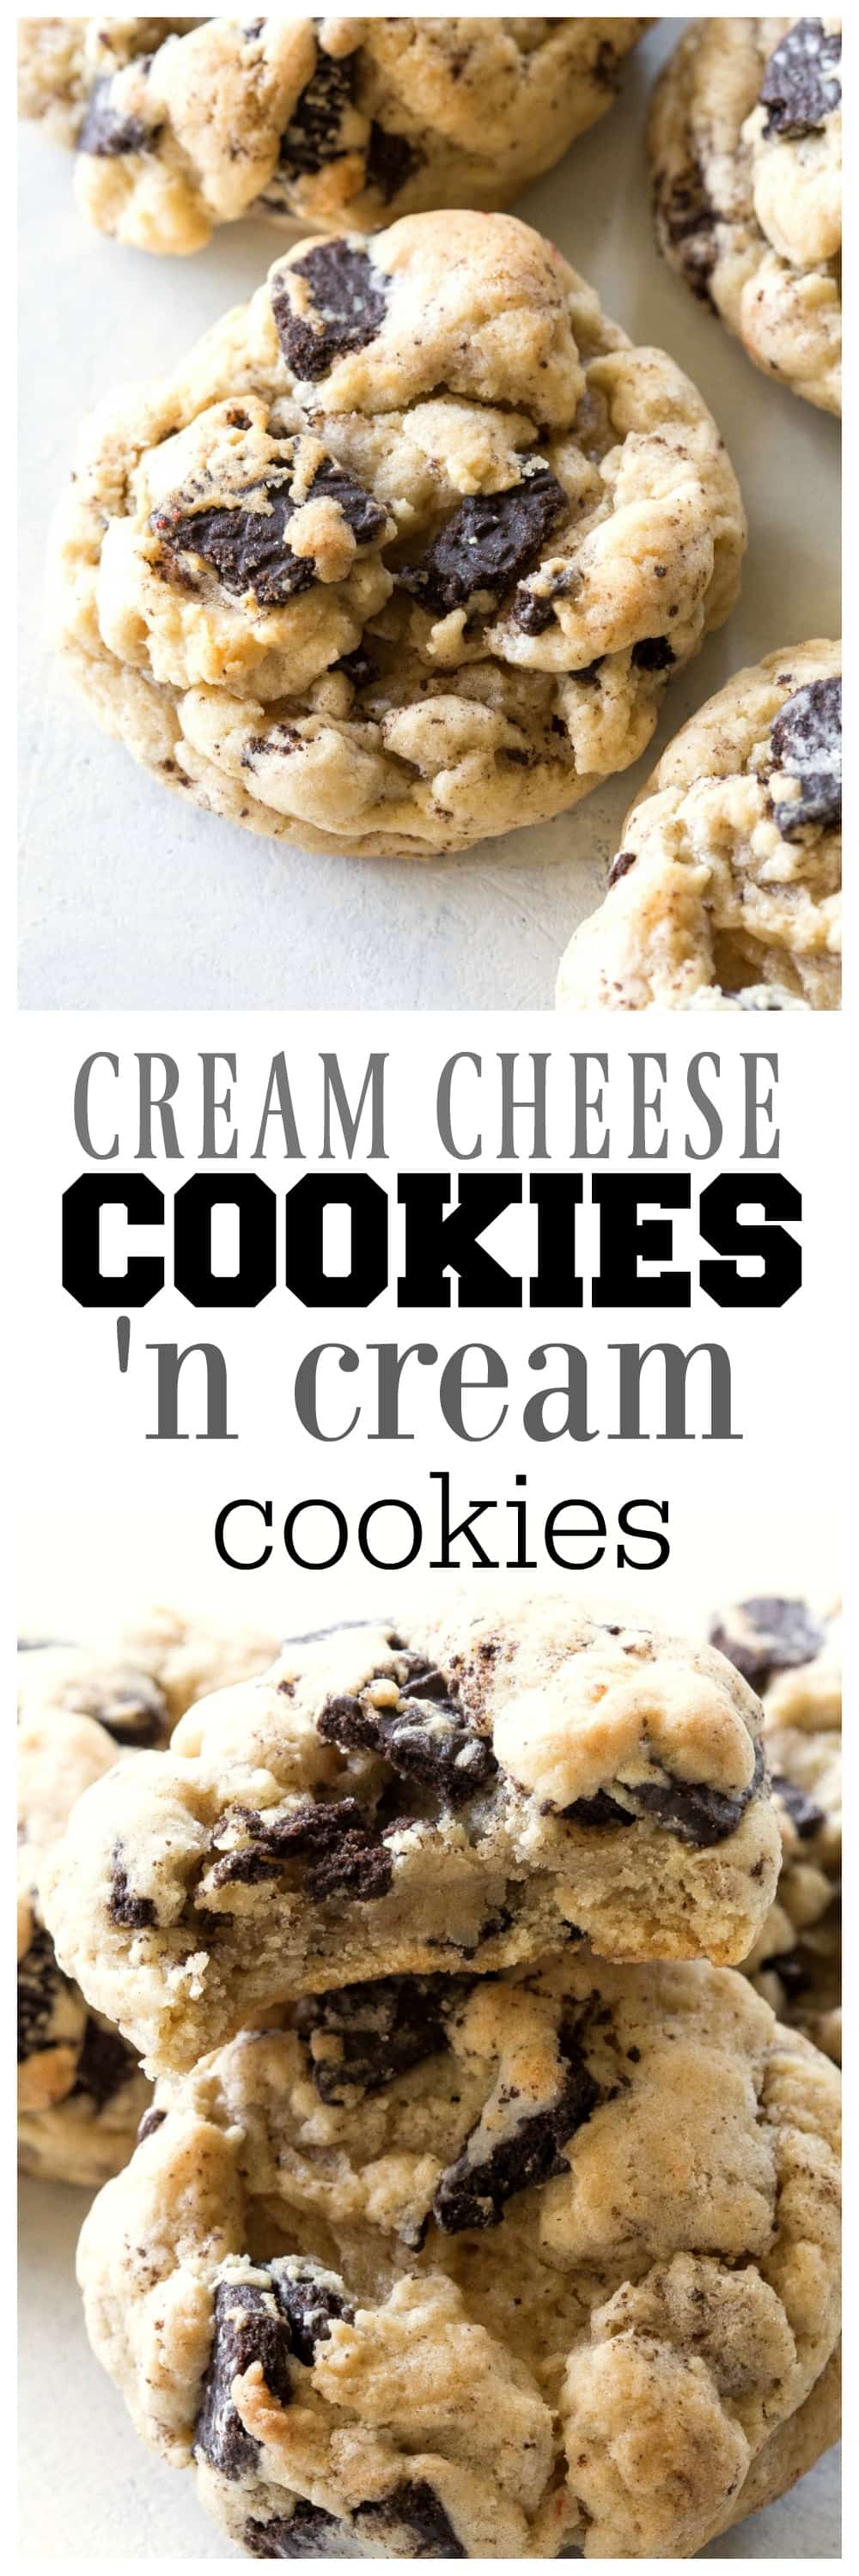 Cream Cheese Cookies 'n Cream Cookies - the softest, creamiest cookies that have chopped up Oreos throughout. Add some festive Oreos for Christmas. #cookies #cream #cheese #dessert #recipe